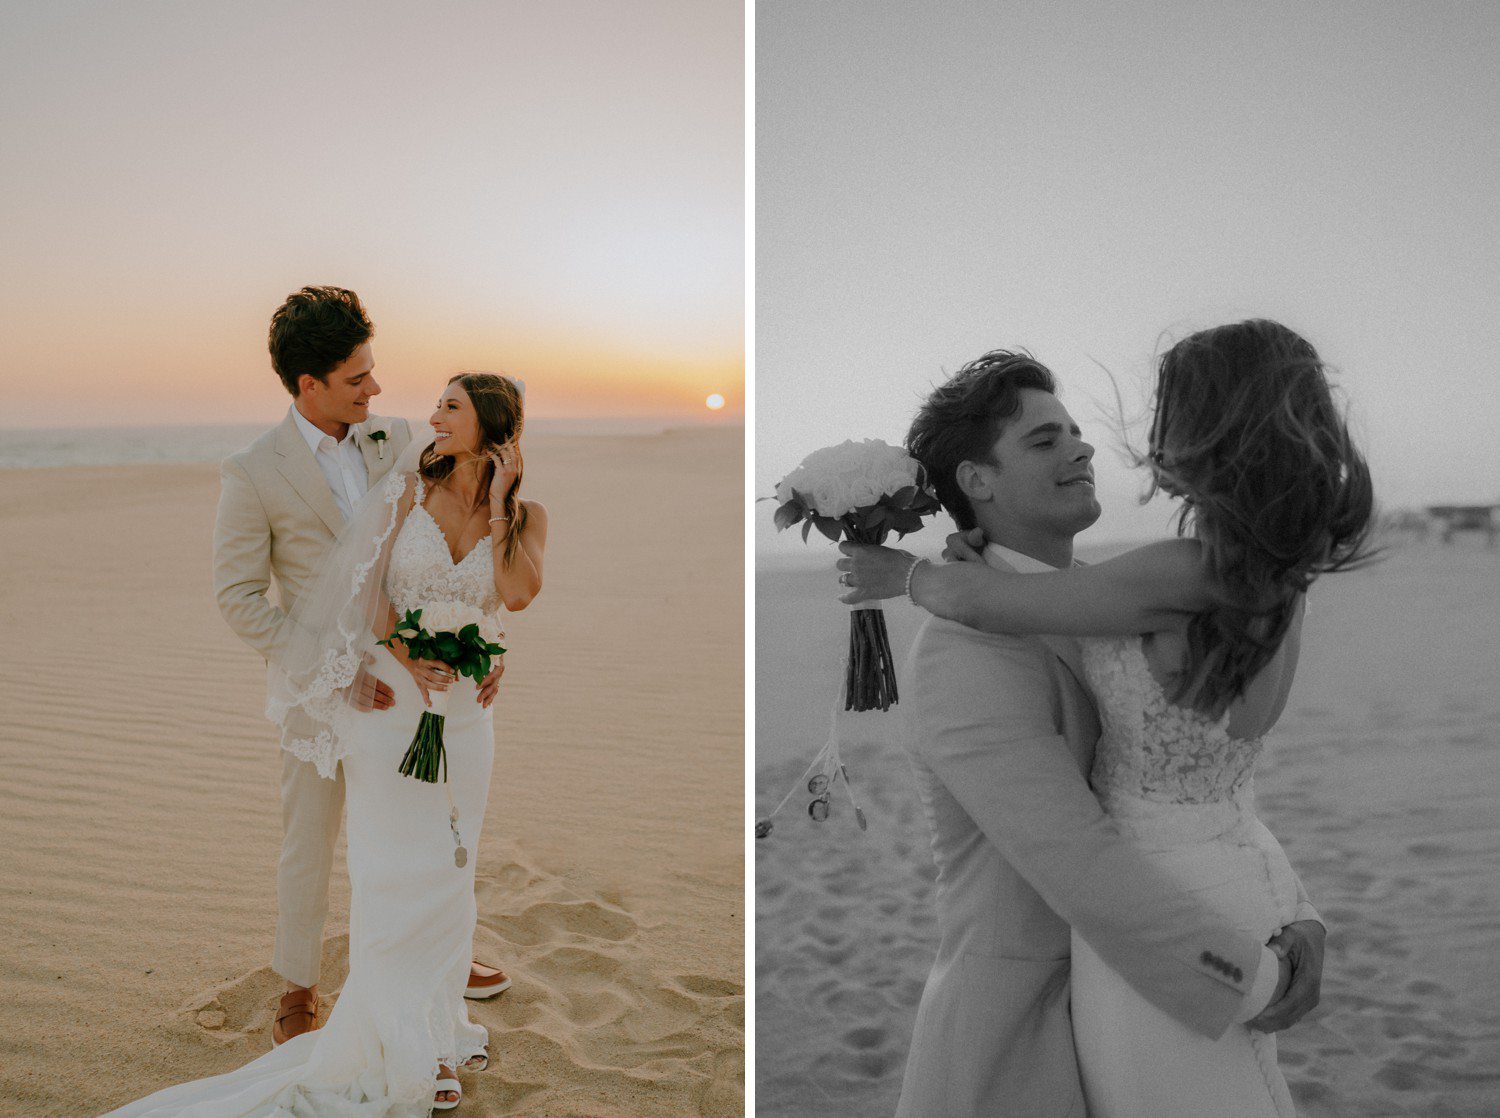 Sunset wedding photos on the beach at destination wedding in Los Cabos.